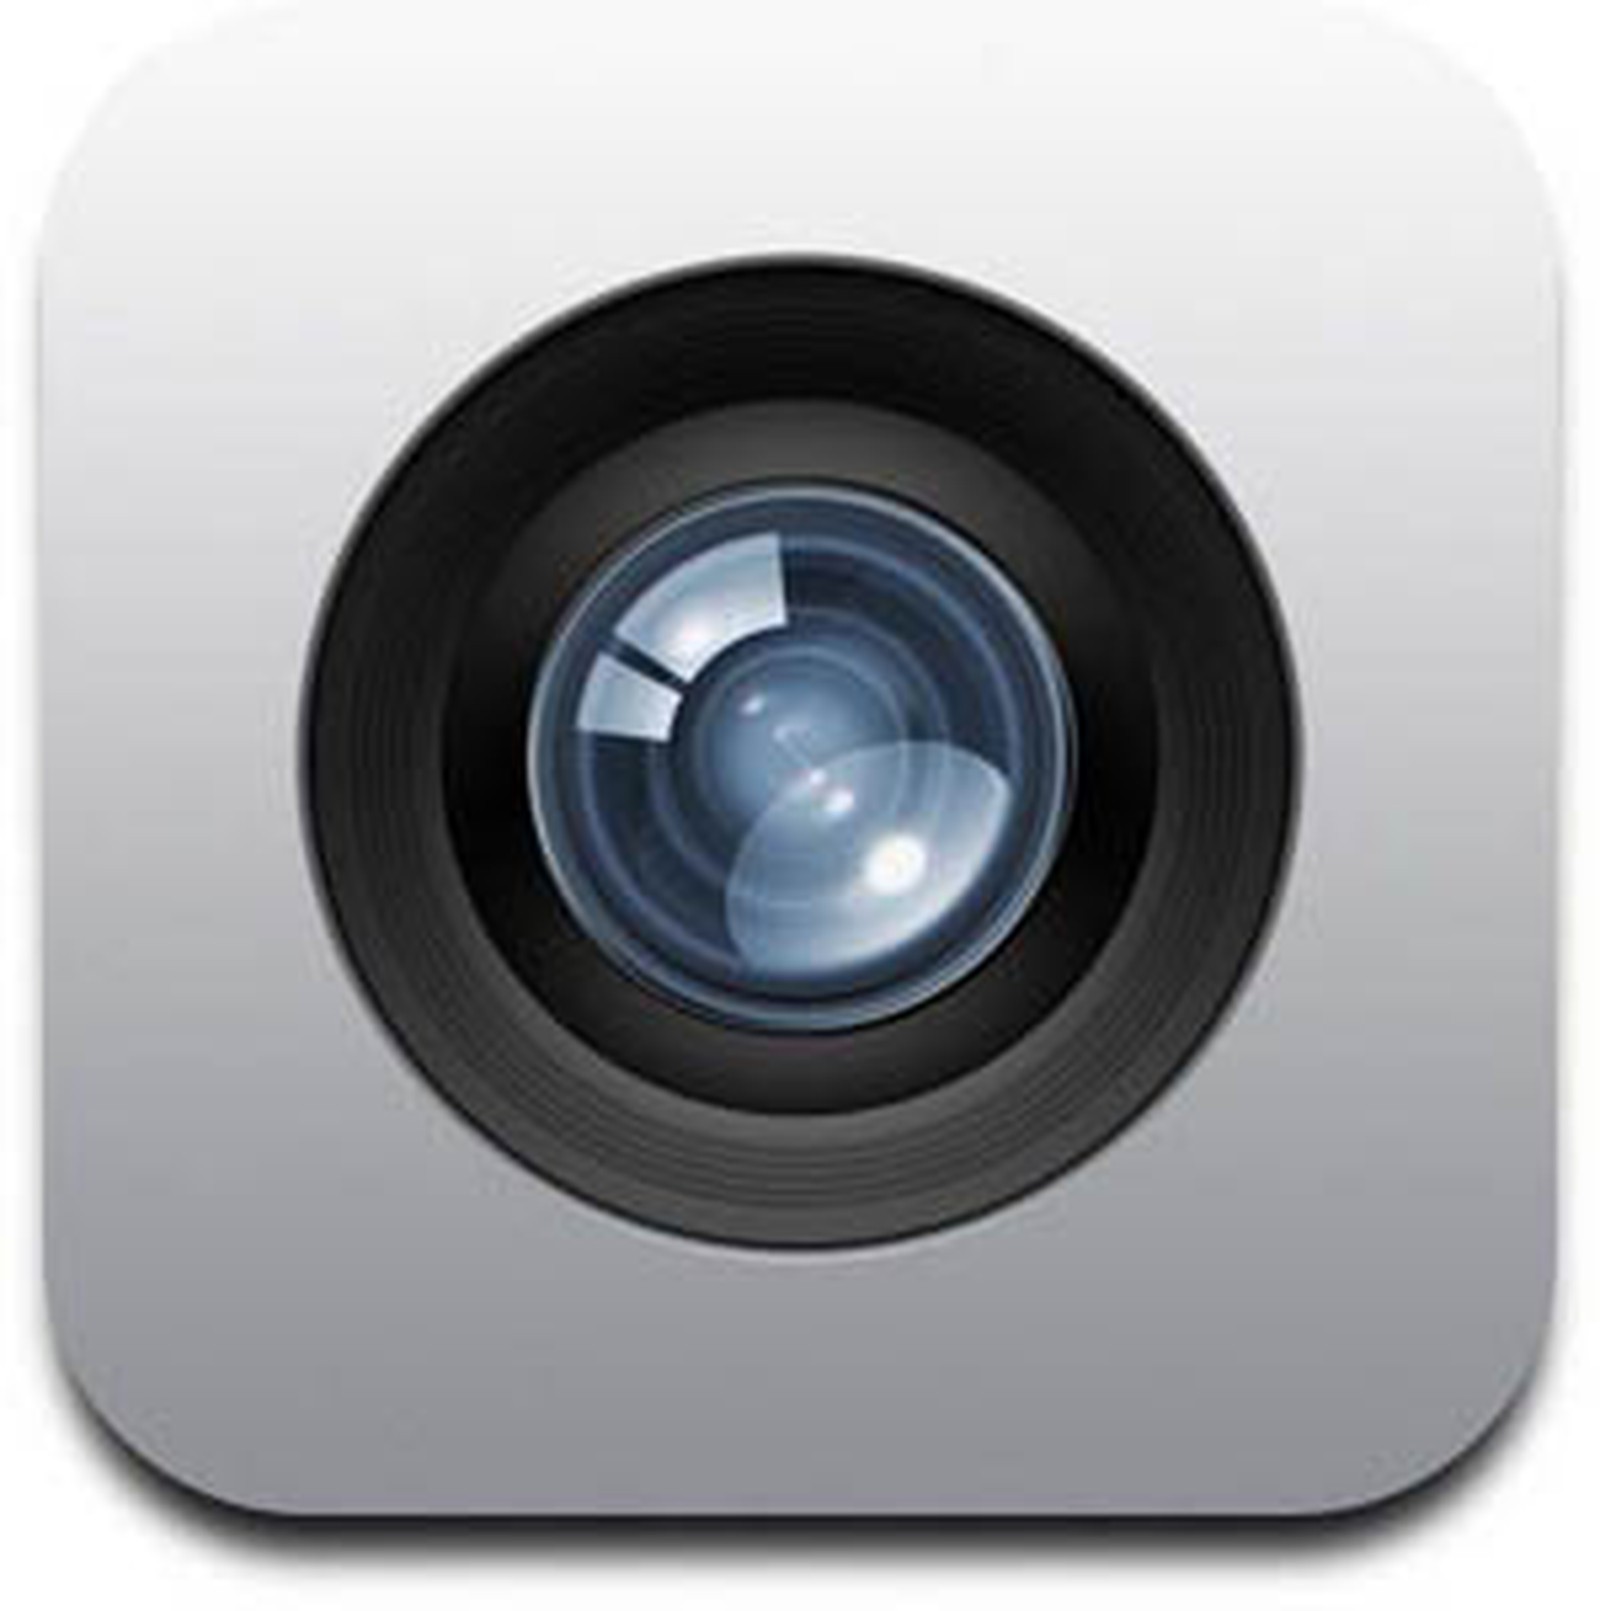 Will.i.am to Launch 14 Megapixel Camera Add-on for iPhone - MacRumors